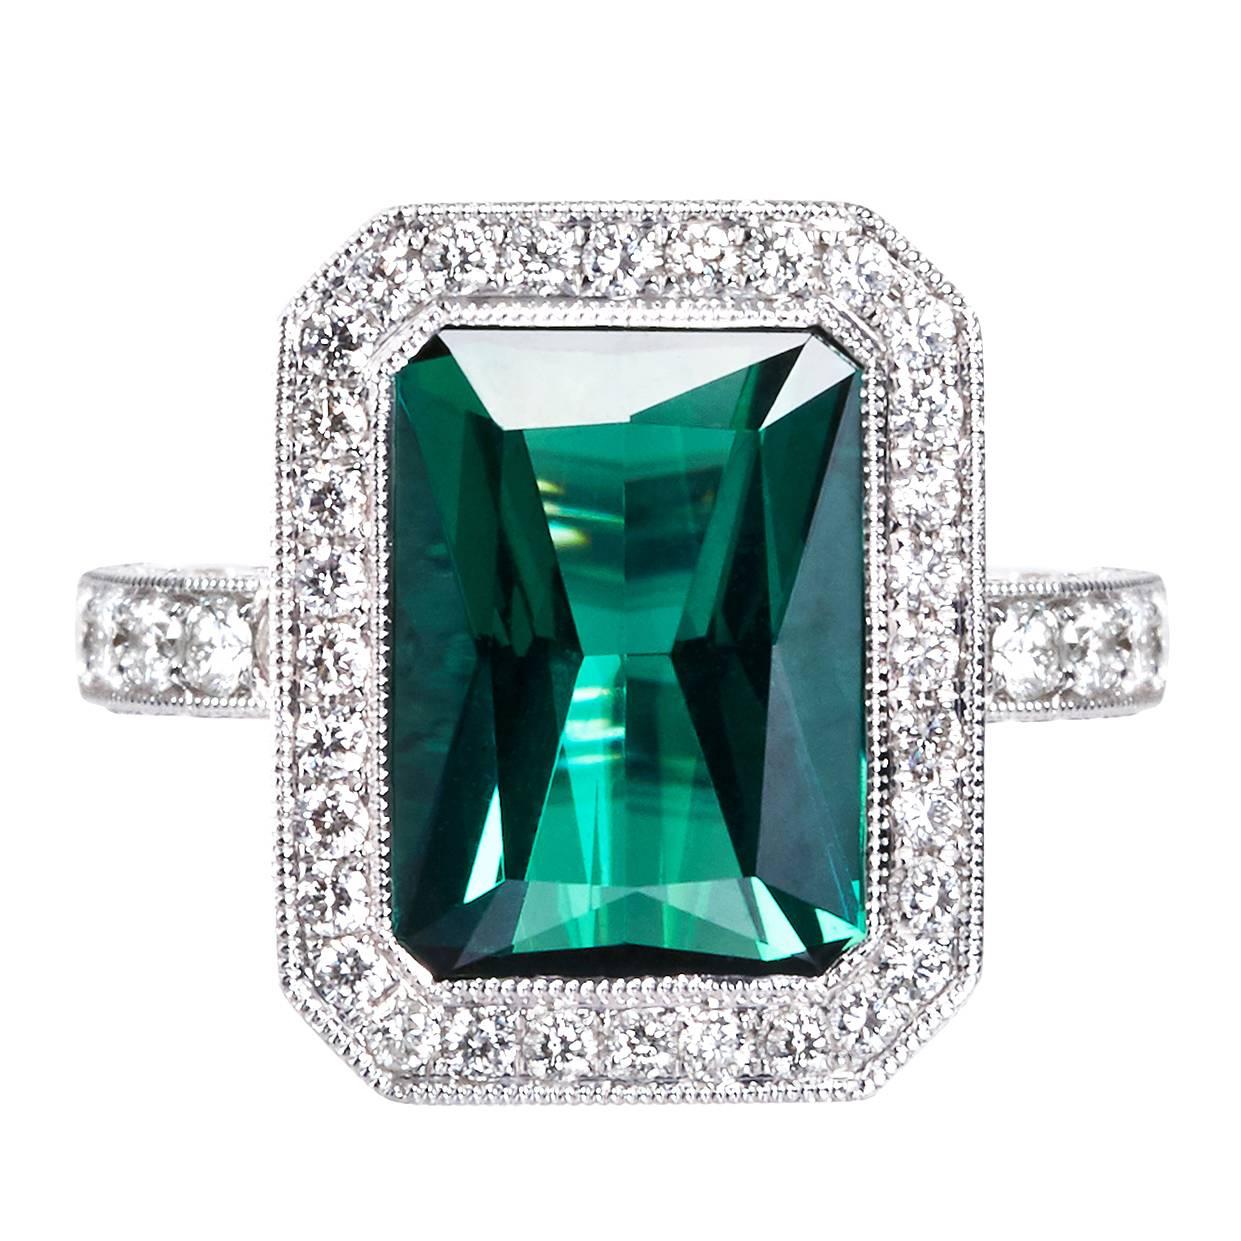 Elegant rectangular mixed cut transparant deep bluish chrome green tourmaline of fine color quality. Hand made one of a kind ring with 124 white brilliant cut diamonds in milgrain setting. Matching earrings available 

Gemstone weight:
1 green